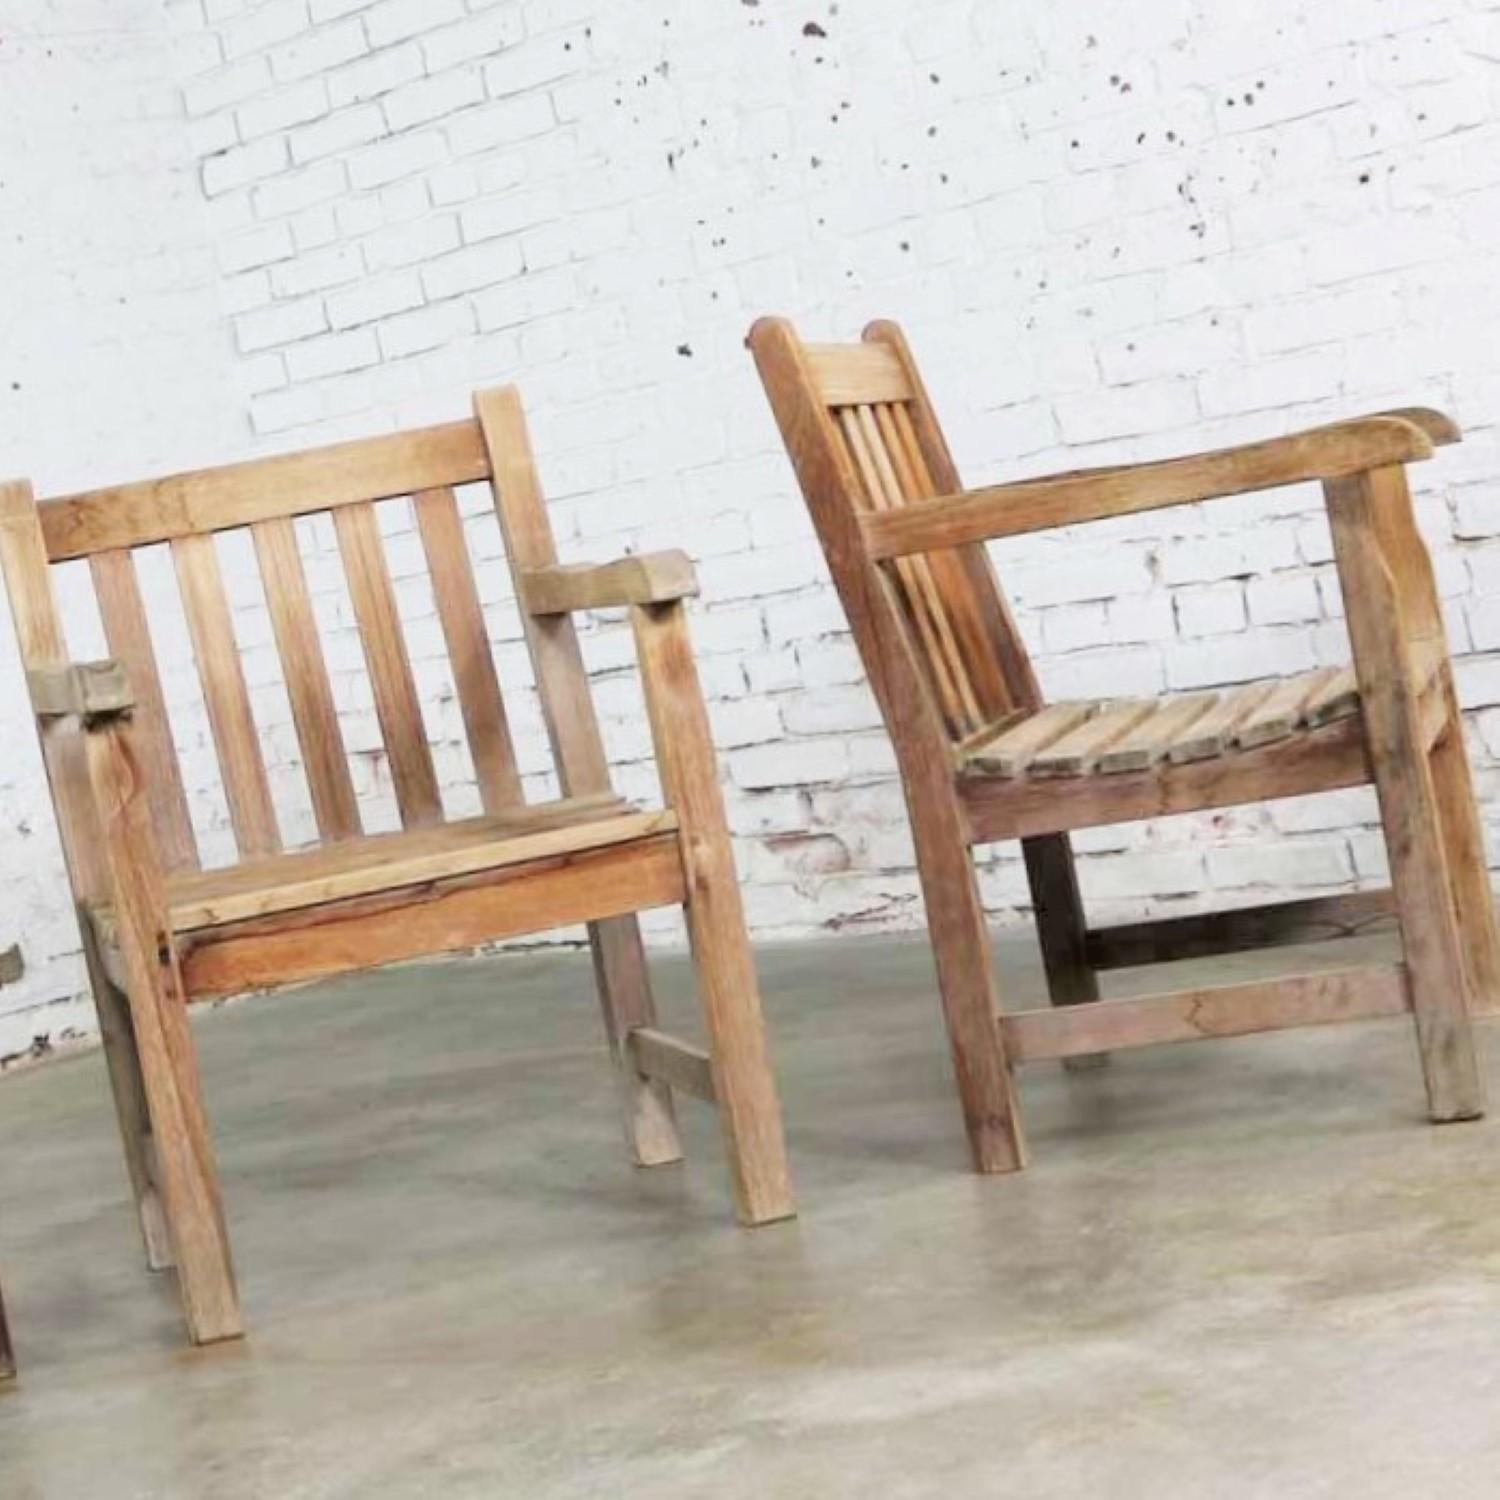 Handsome natural teak vintage Windsor outdoor patio or deck armchair. We have a total of 4 and are pricing them per chair. These chairs are in wonderful sturdy condition with the natural age patina of teak that has spent some time outside but cared